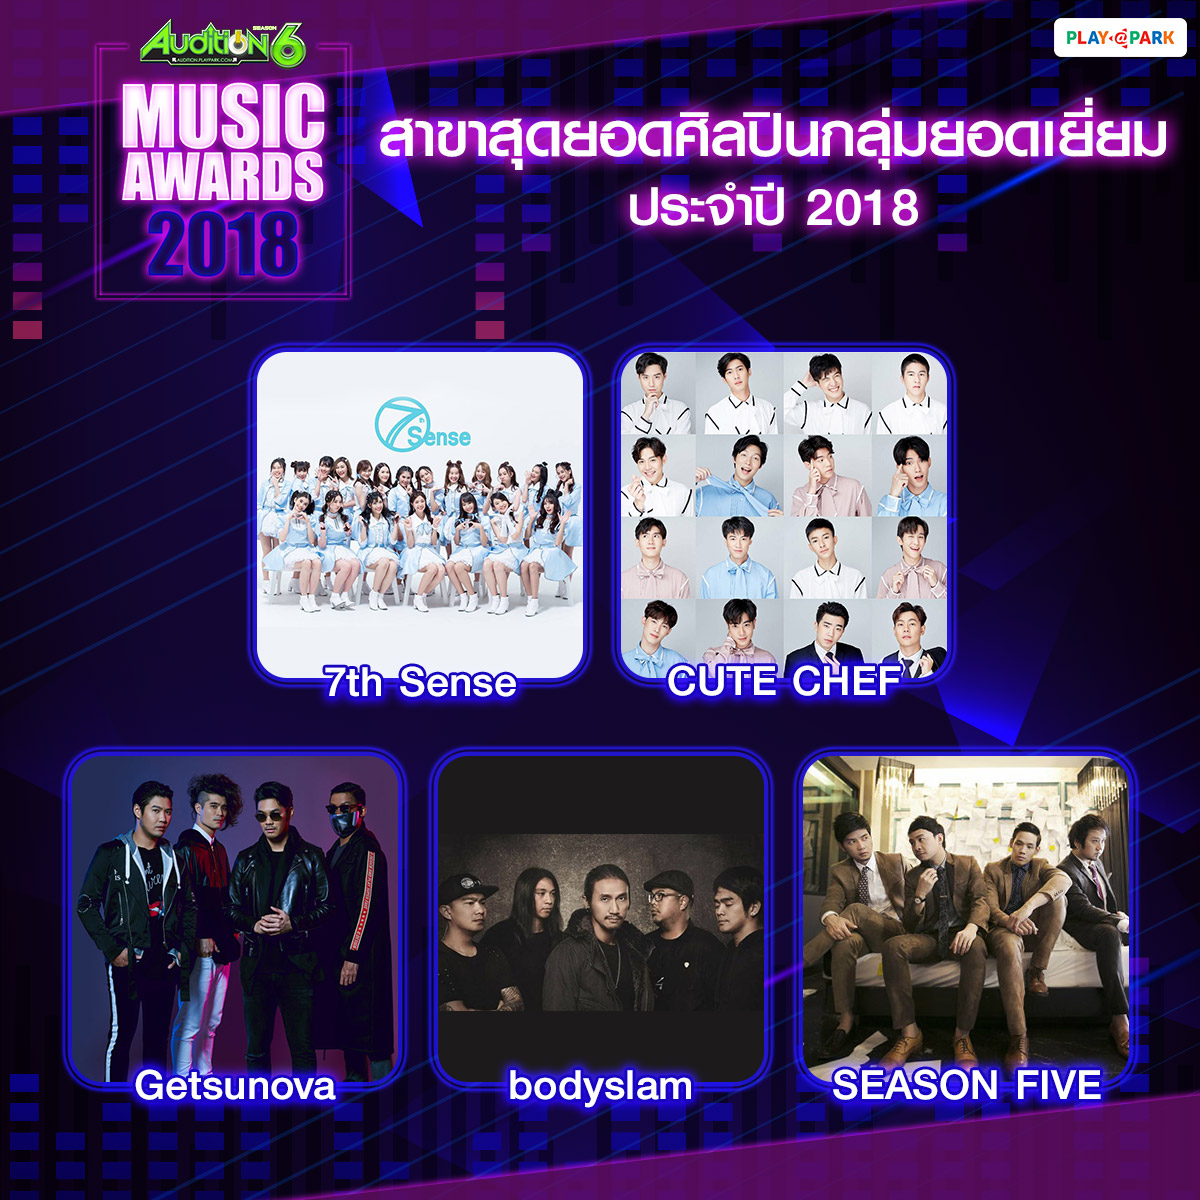 [AUDITION] AUDITION MUSIC AWARD 2018 